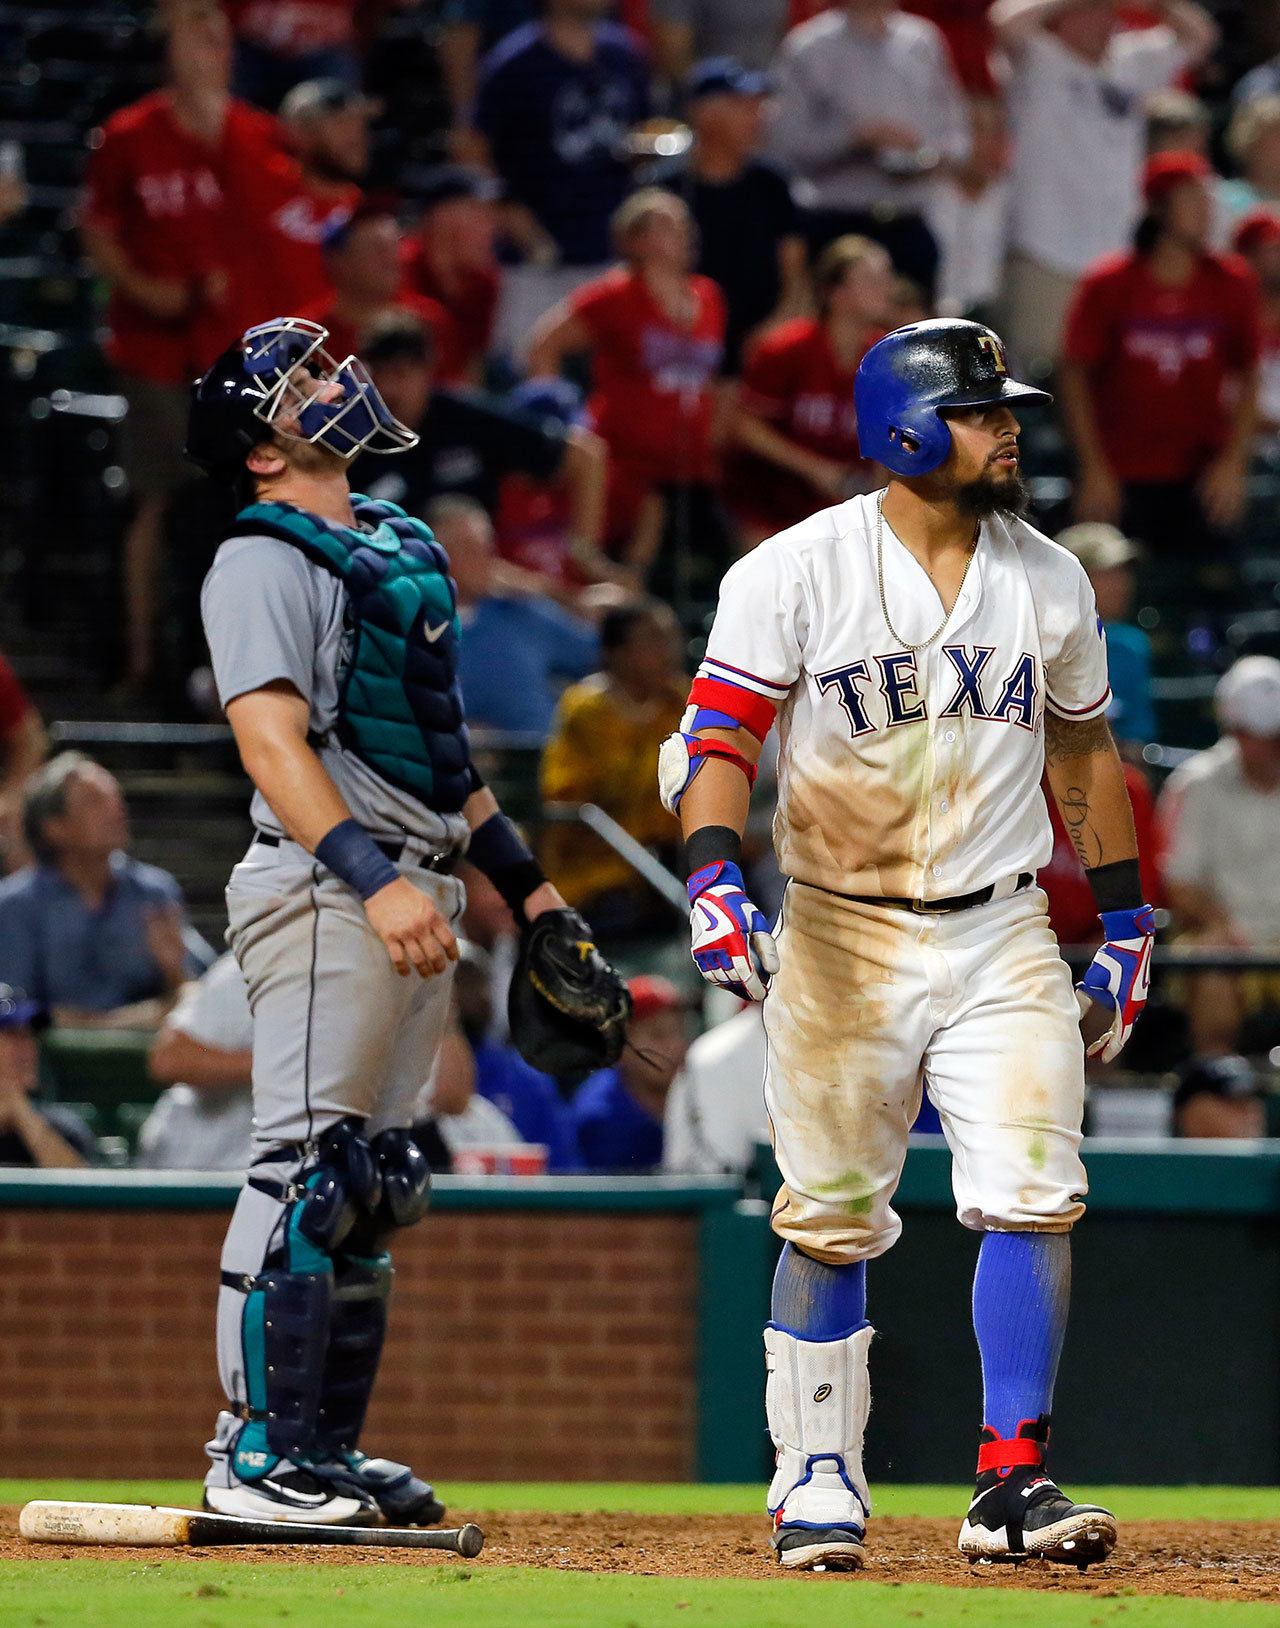 Mariners catcher Mike Zunino (left) looks skyward as the Rangers’ Rougned Odor watches his two-run home run in the ninth inning Tuesday in Arlington, Texas. The homer scored Adrian Beltre, giving the Rangers an 8-7 win. (AP Photo/Tony Gutierrez)